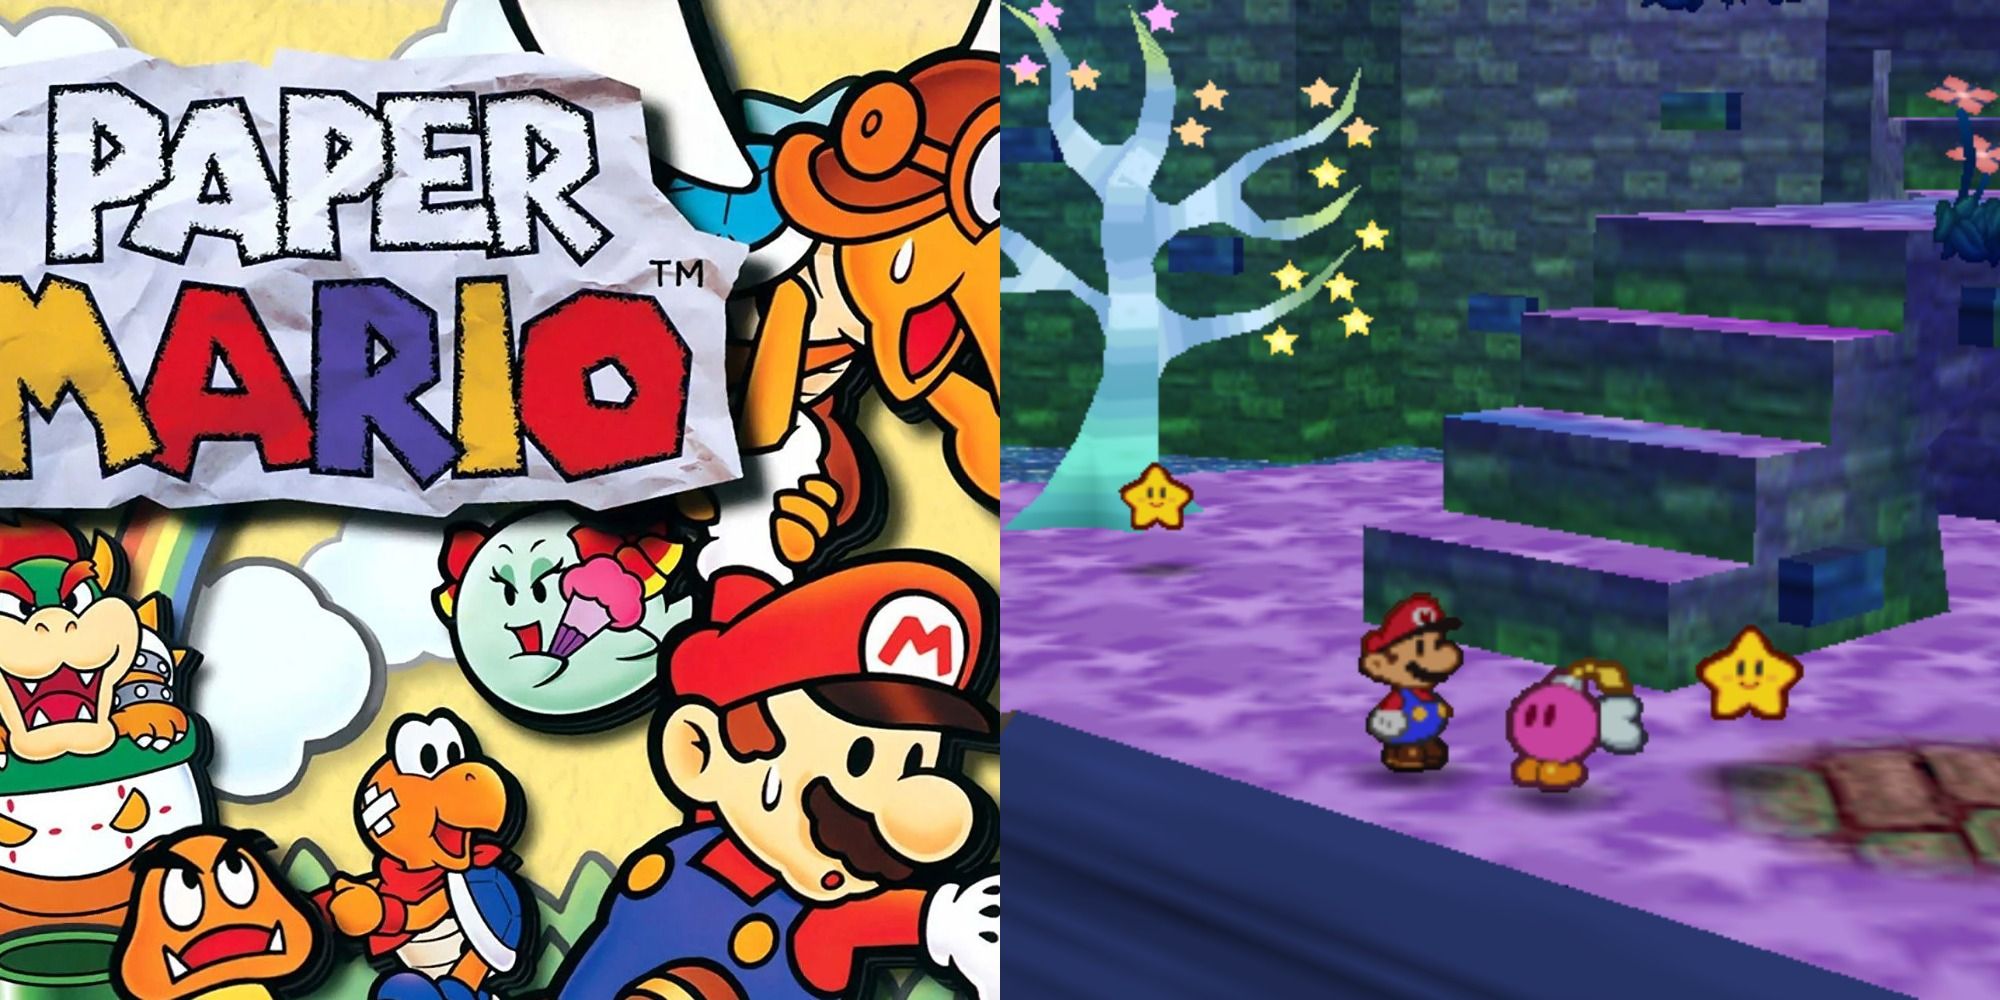 Split image showing the cover for Paper Mario 64 and Mario in Star Haven